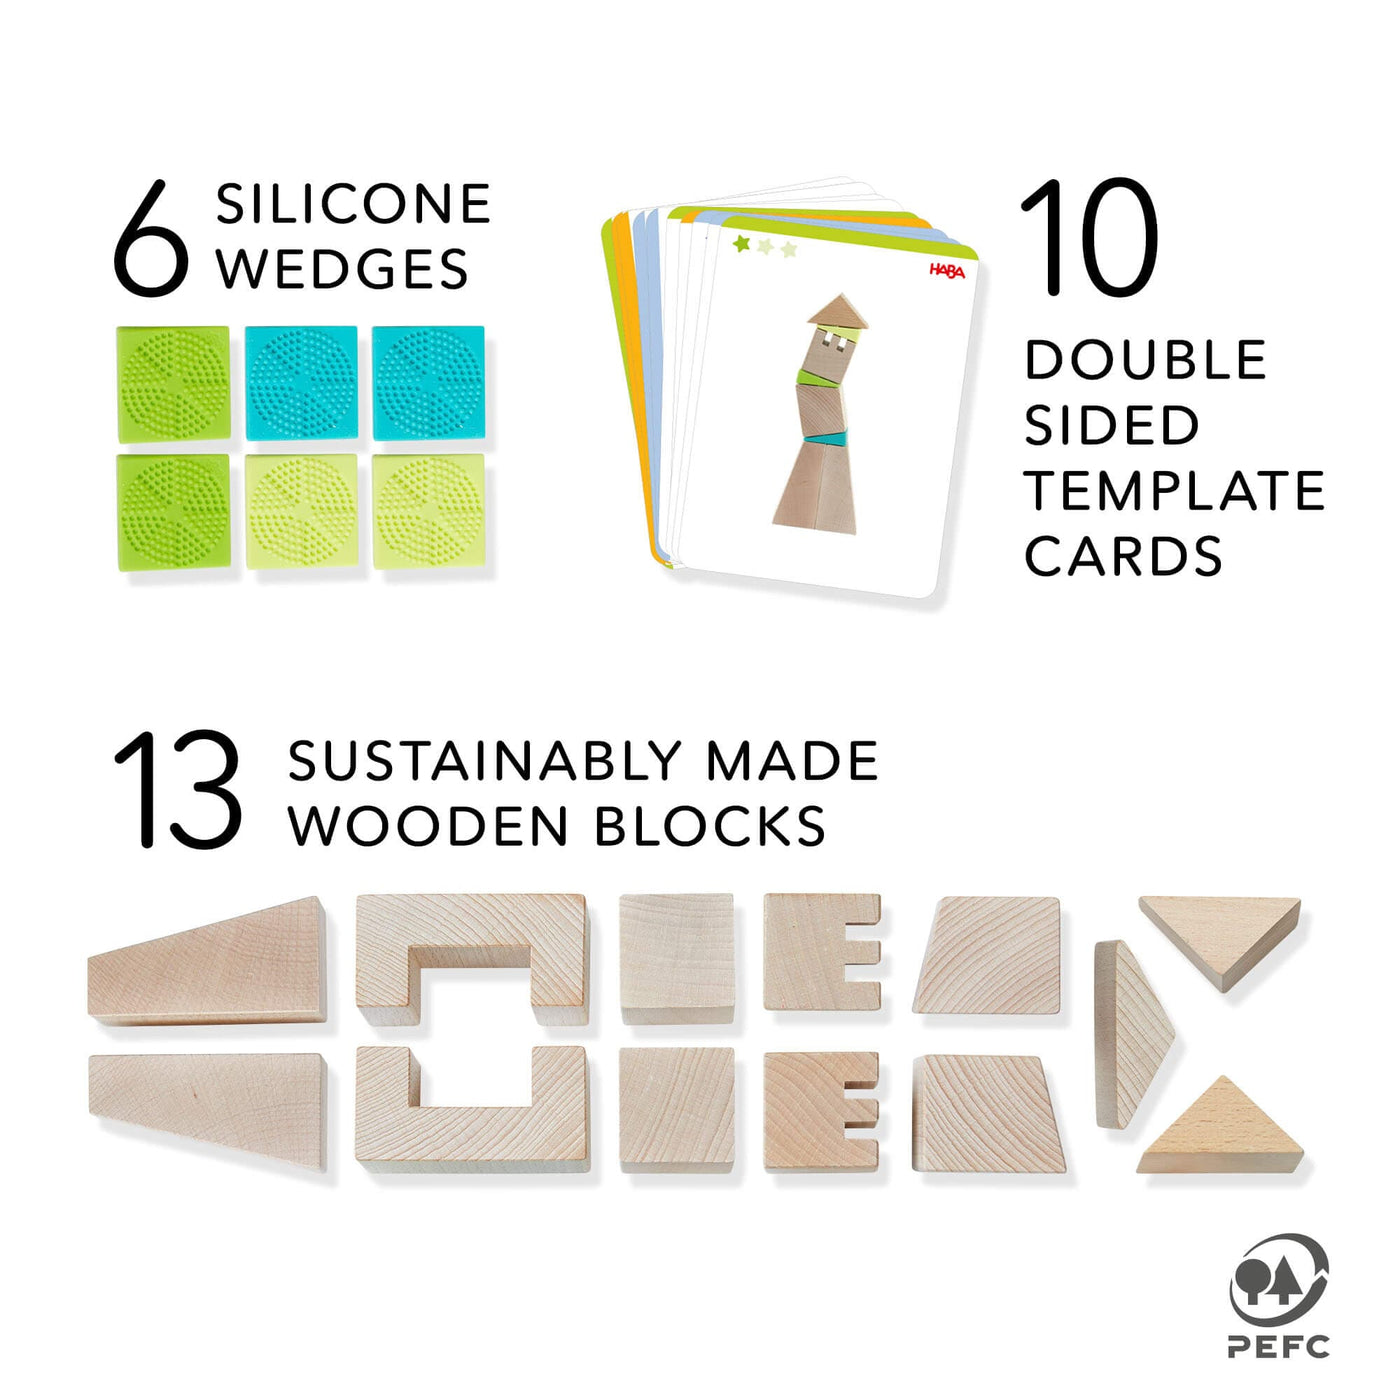 6 silicone wedges, 10 double sided template cards, 13 sustainably made wooden blocks - Crooked Tower Wooden Blocks - HABA USA